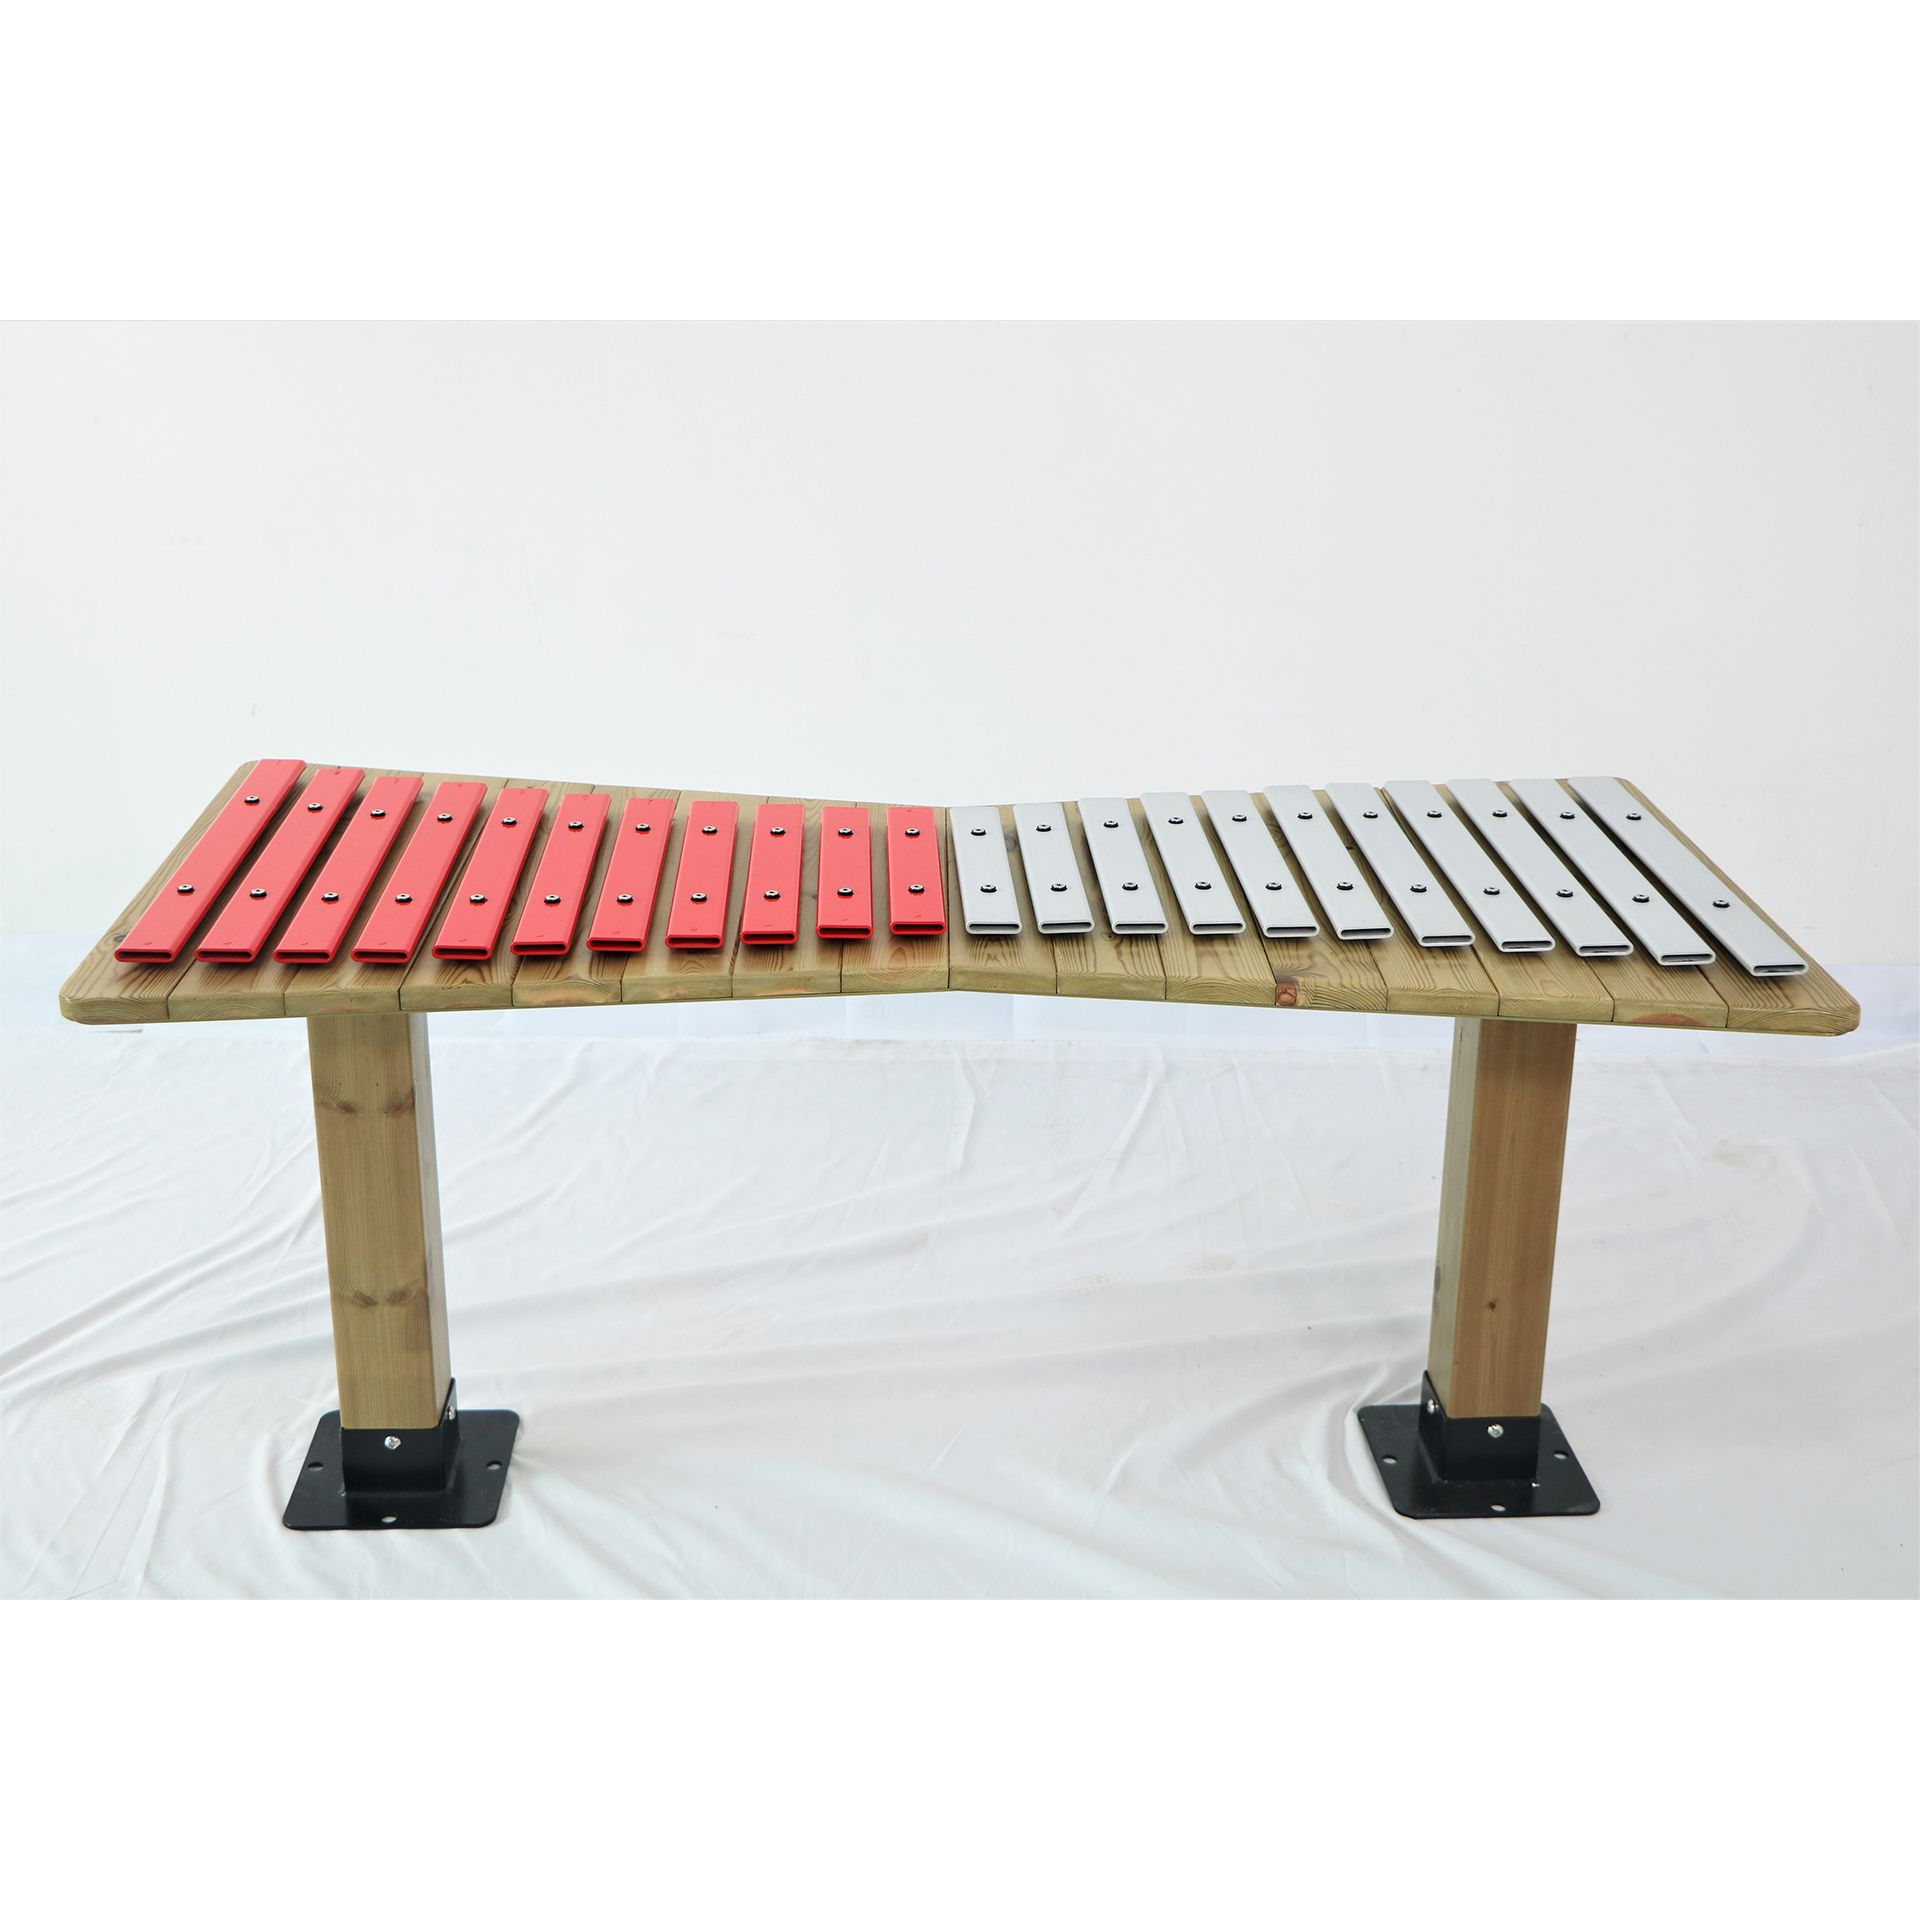 Outdoor Xylophone Musical Playground Equipment Percussion Instruments